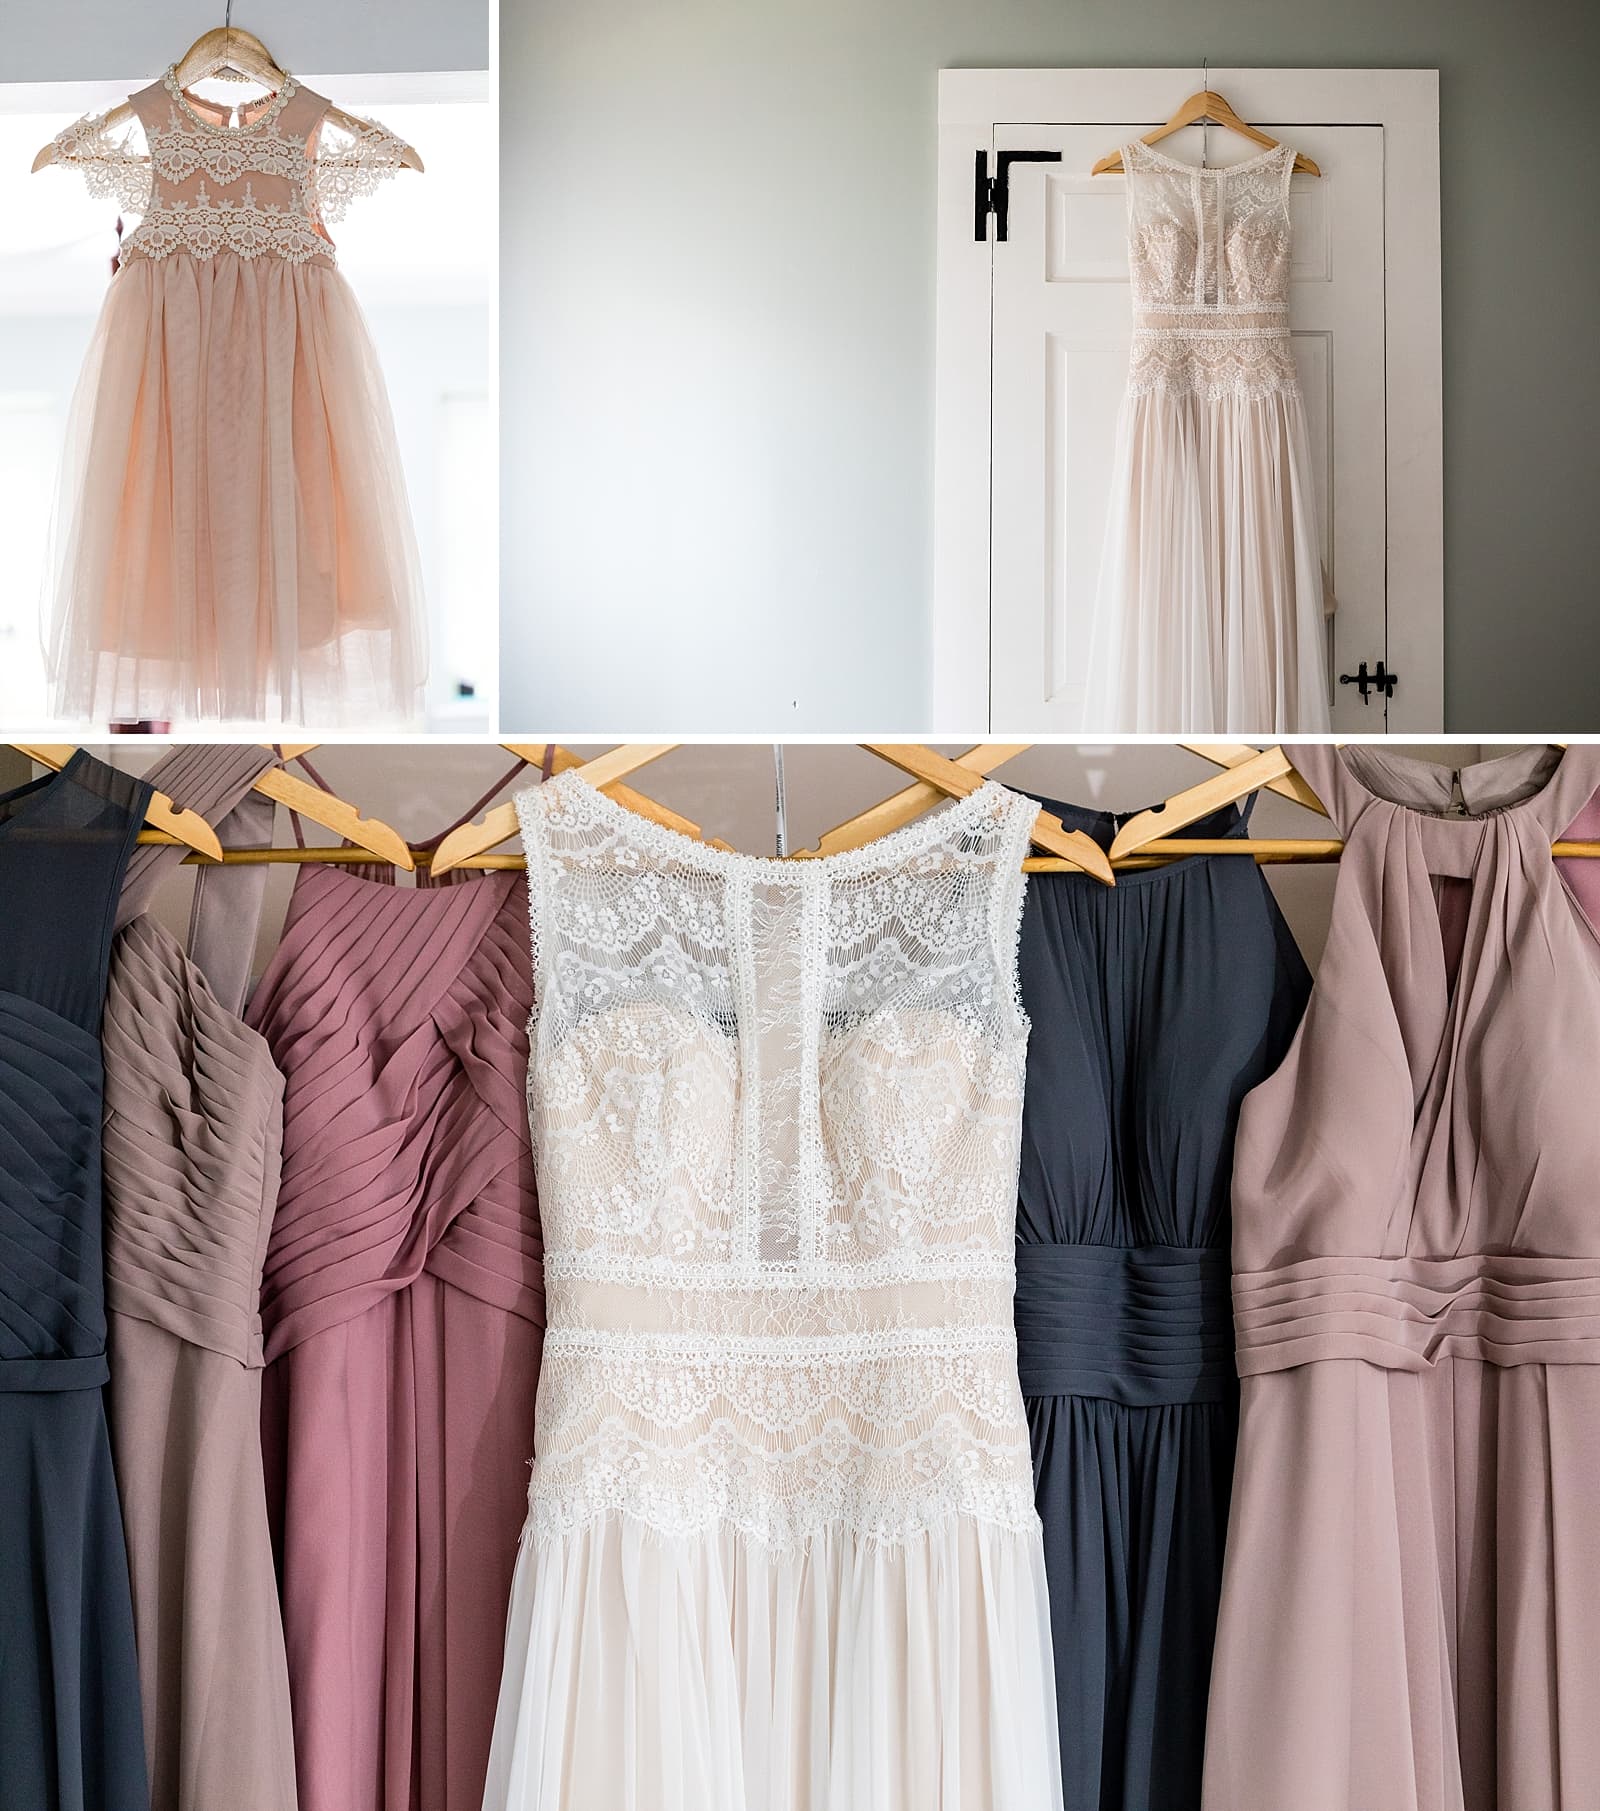 Mauve toned bridesmaid dresses hanging with a lace wedding dress.